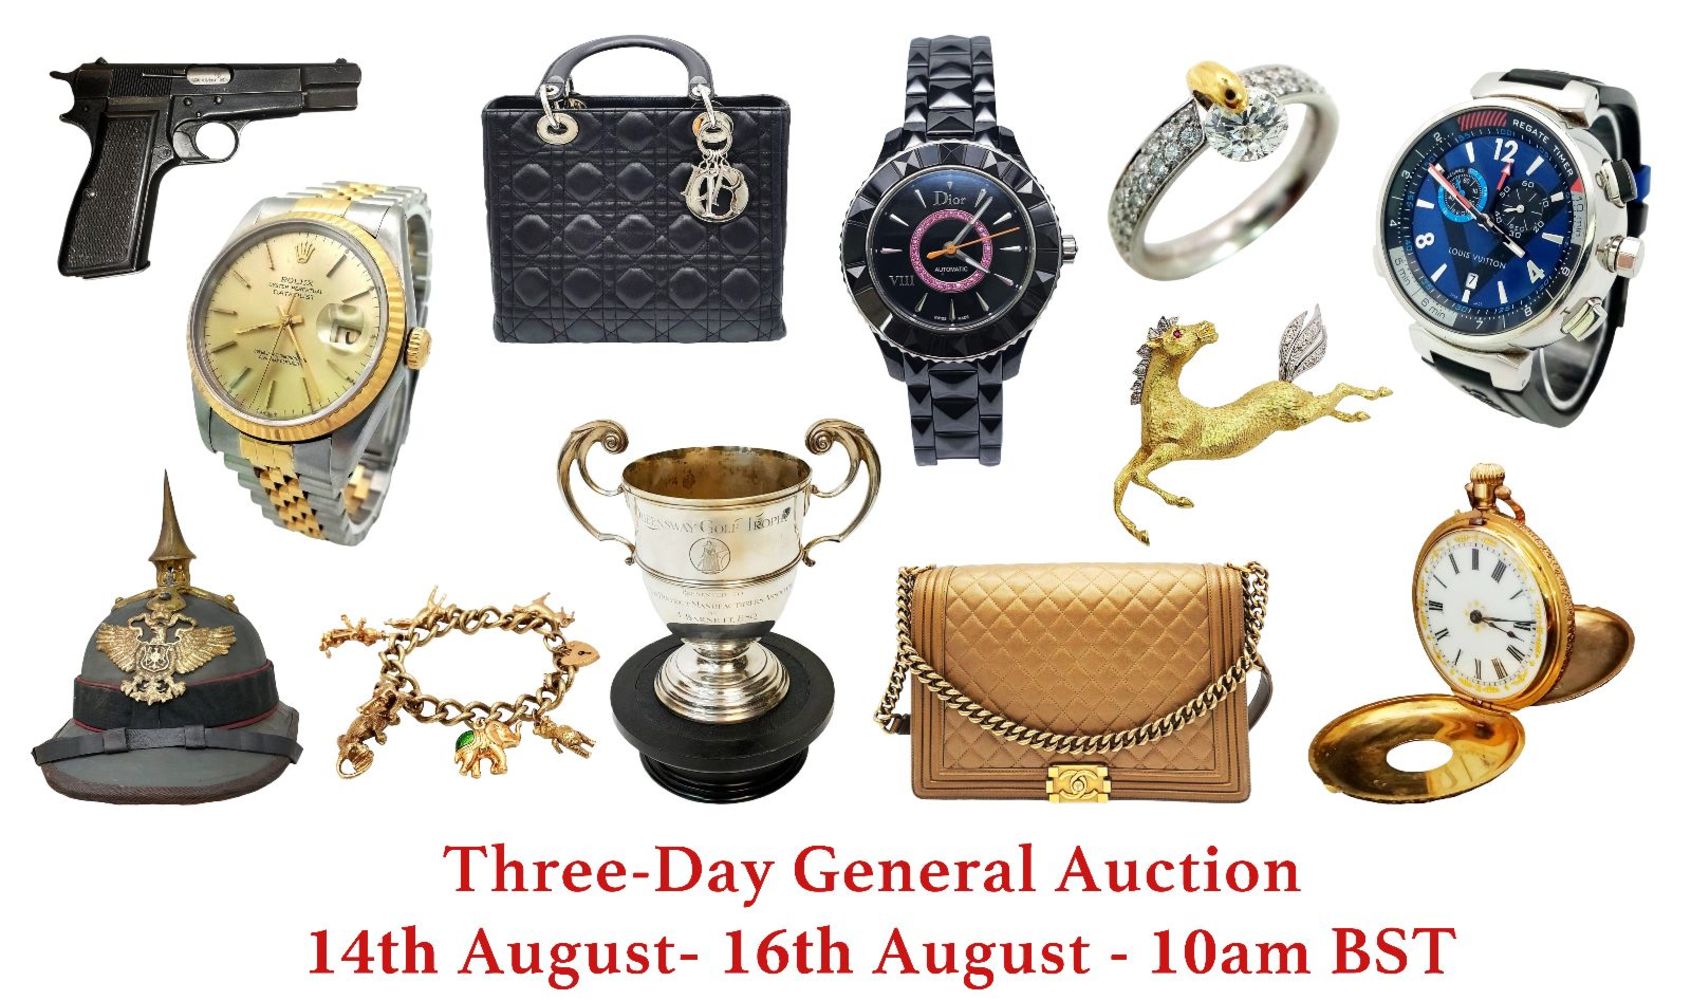 Three-Day General Auction (Jewellery, Watches, Designer Items, Militaria, Art, Antique and Collectables)